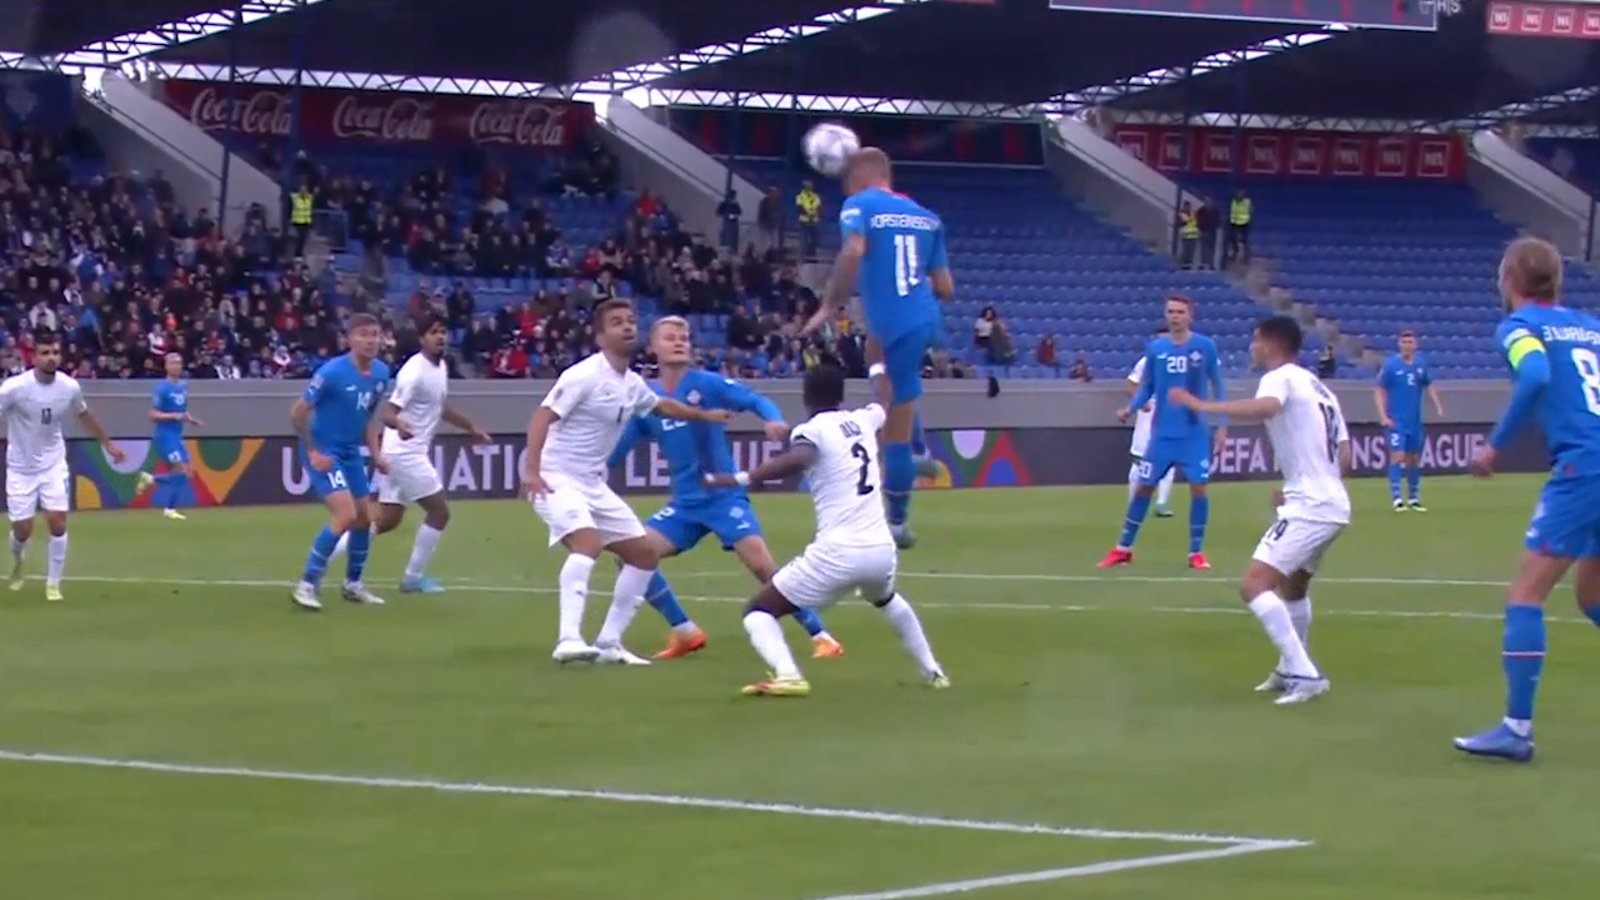 Iceland takes a 1-0 lead on header from Jón Thorsteinsson